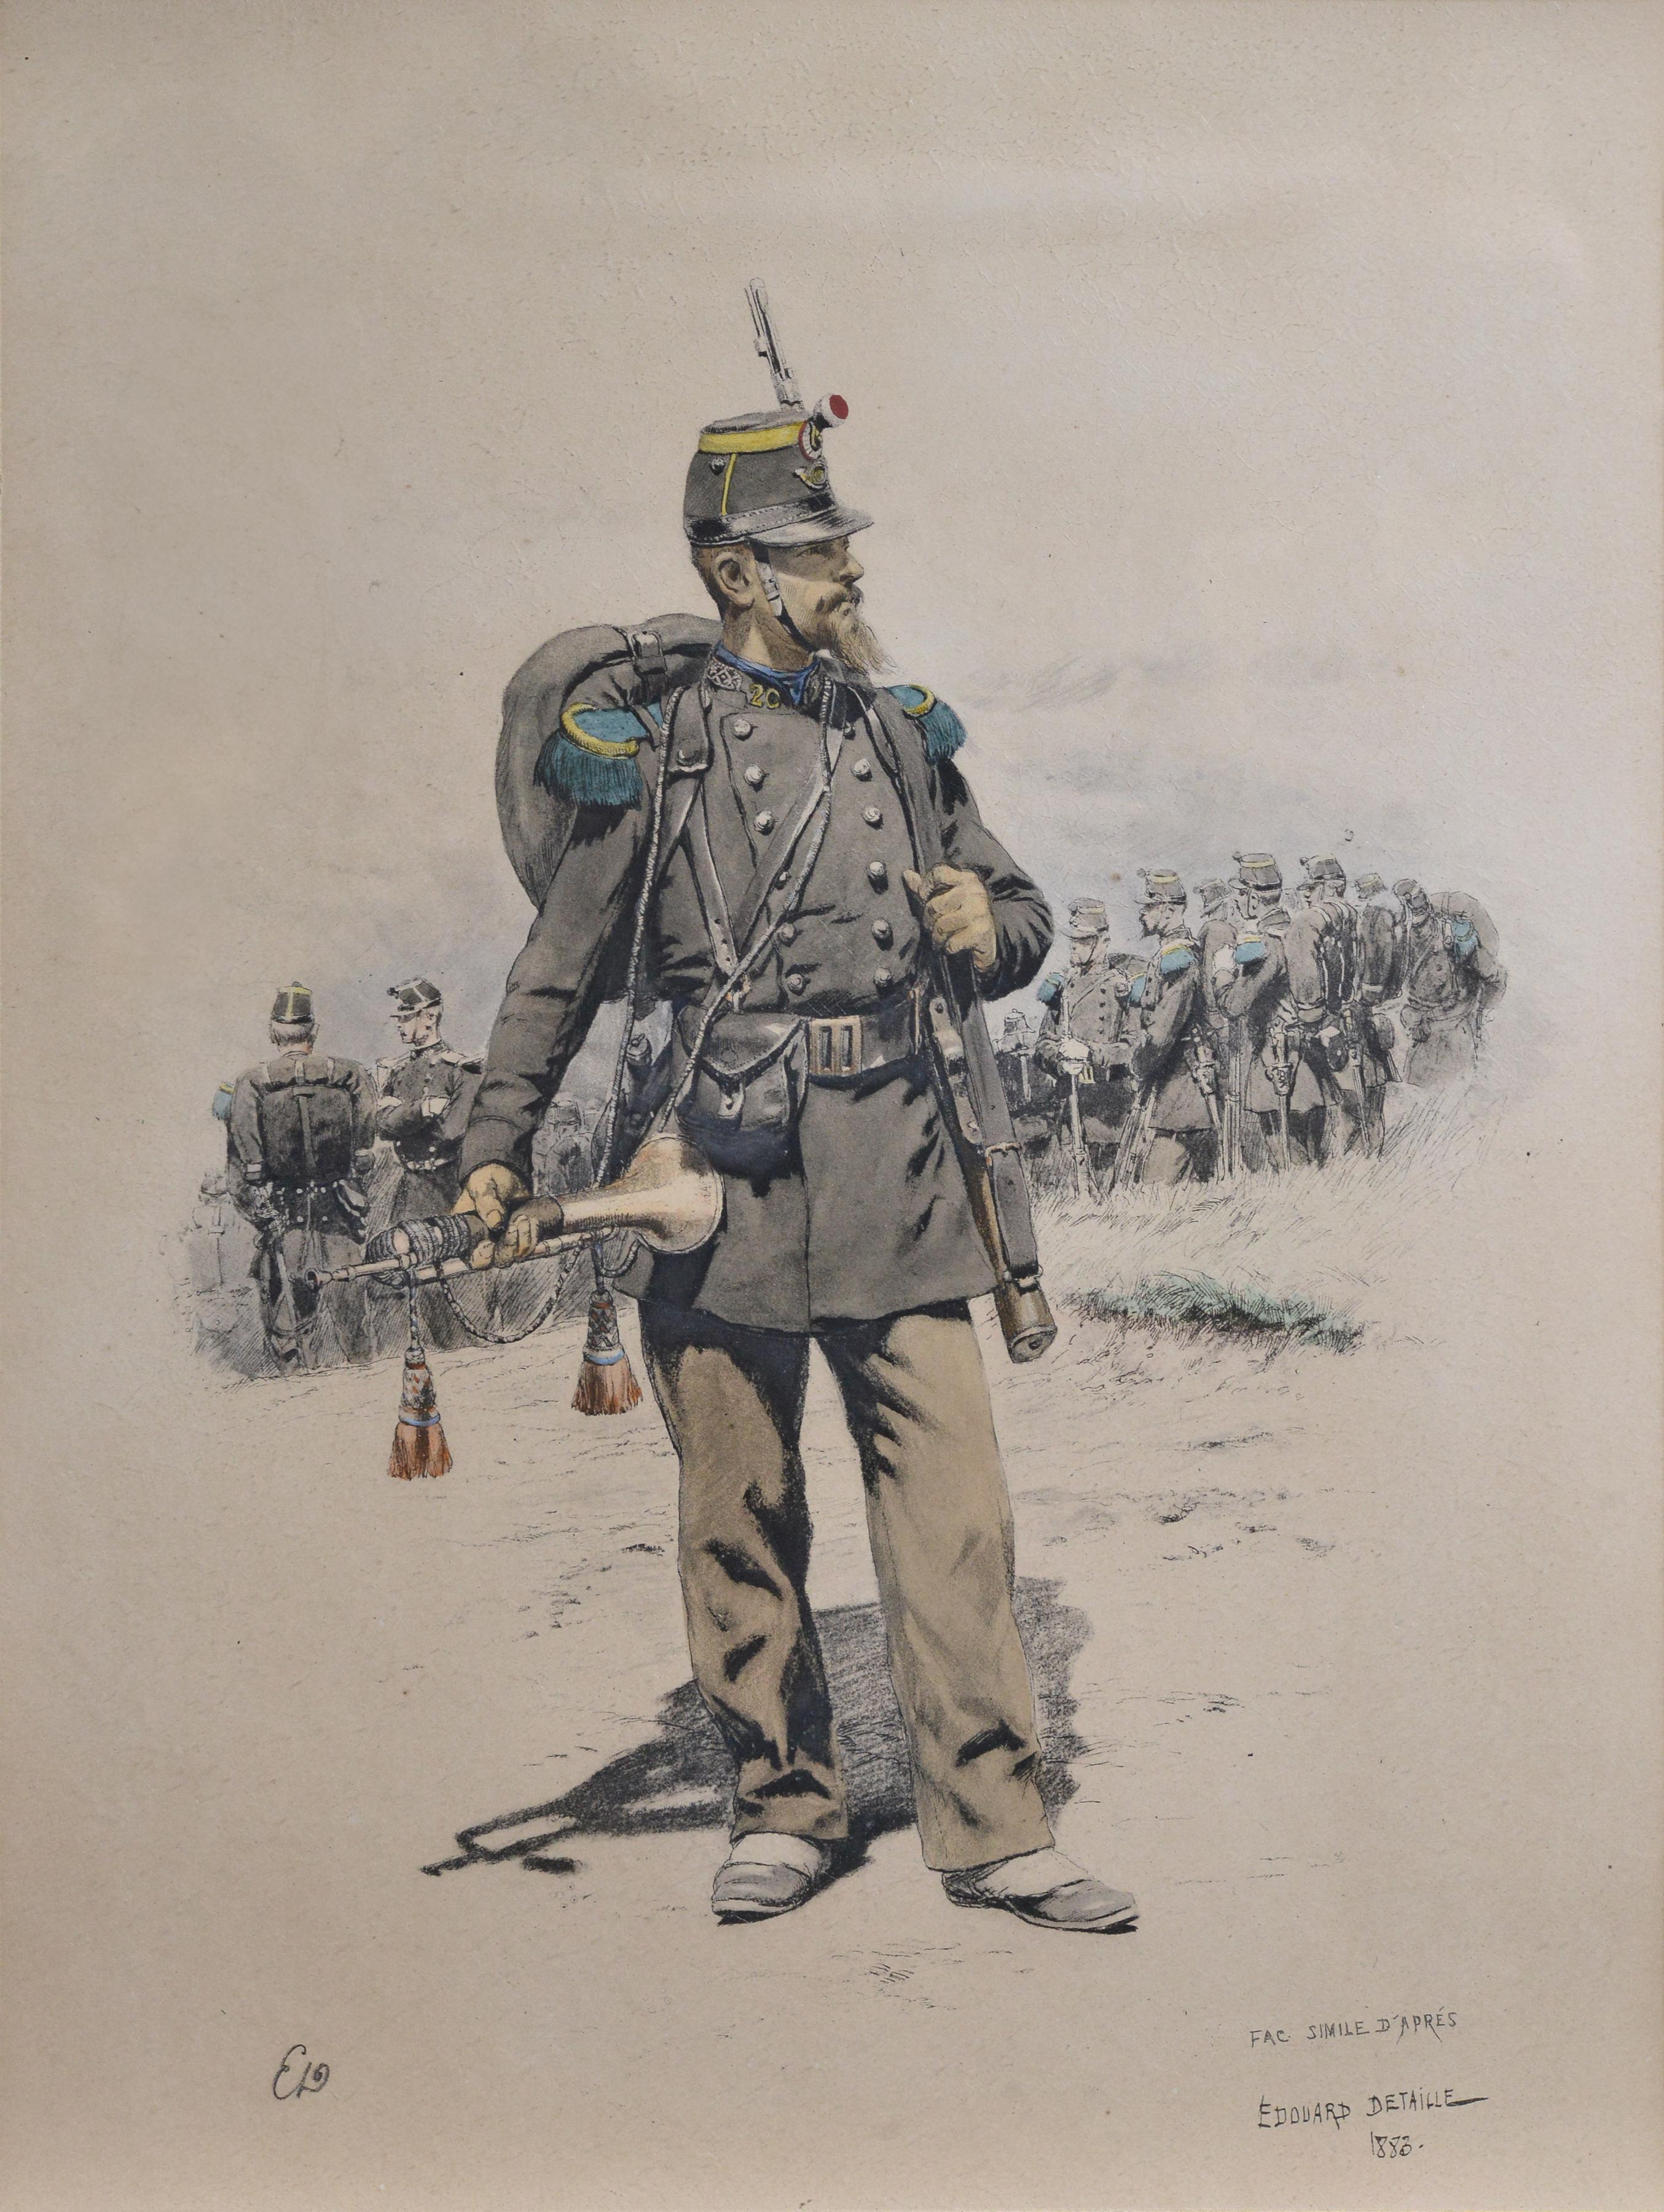 Bugler of Chasseurs Corps by Ed Detaille 19th Century Facsimile Color Lithograph - Print by Jean Baptiste Édouard Detaille